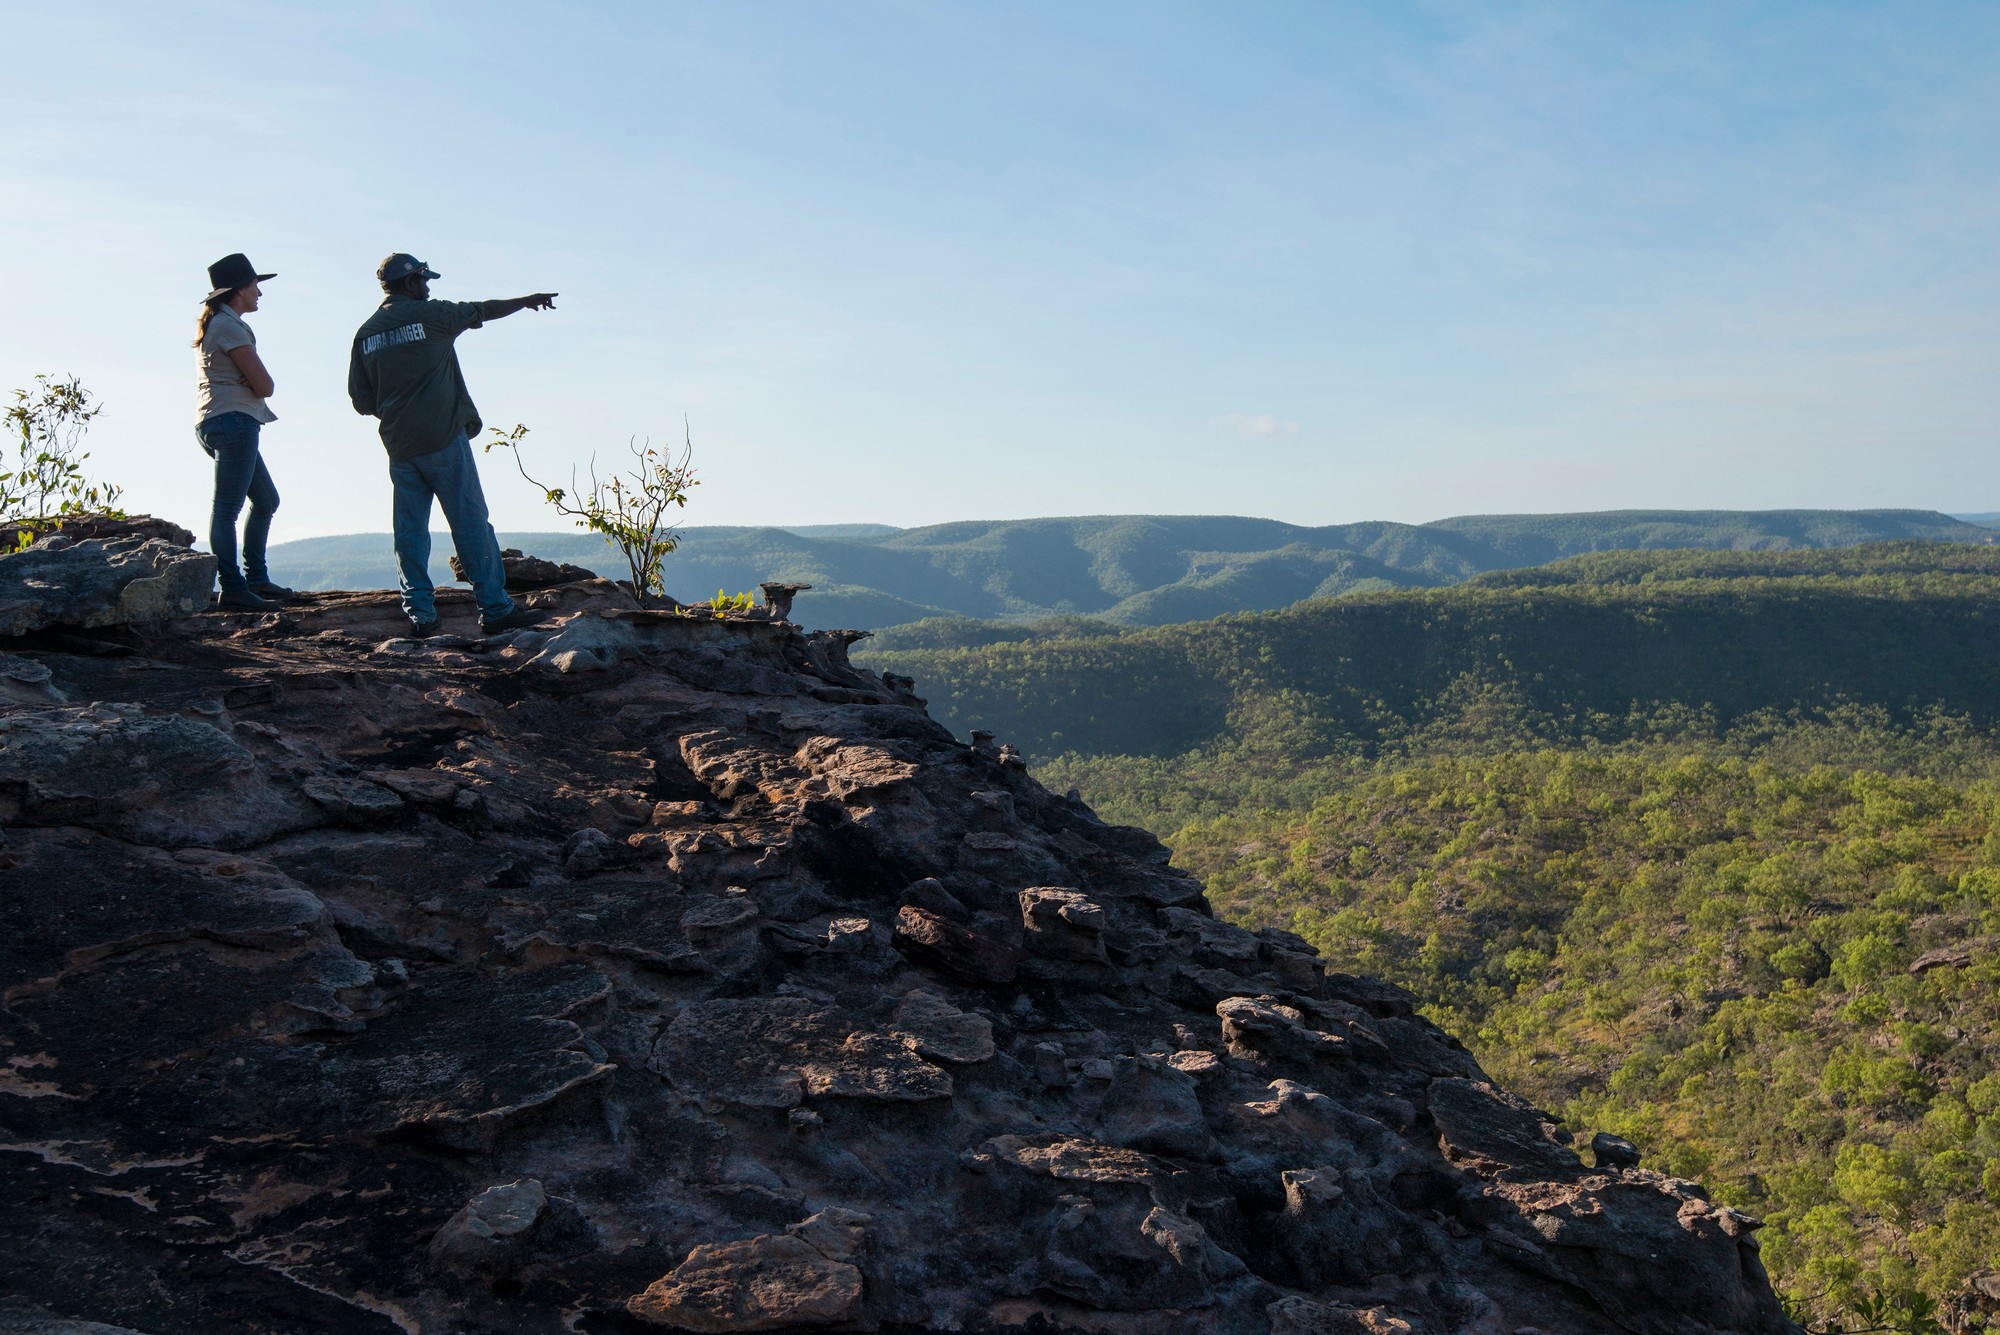 Indigenous Ranger looks out over bluff